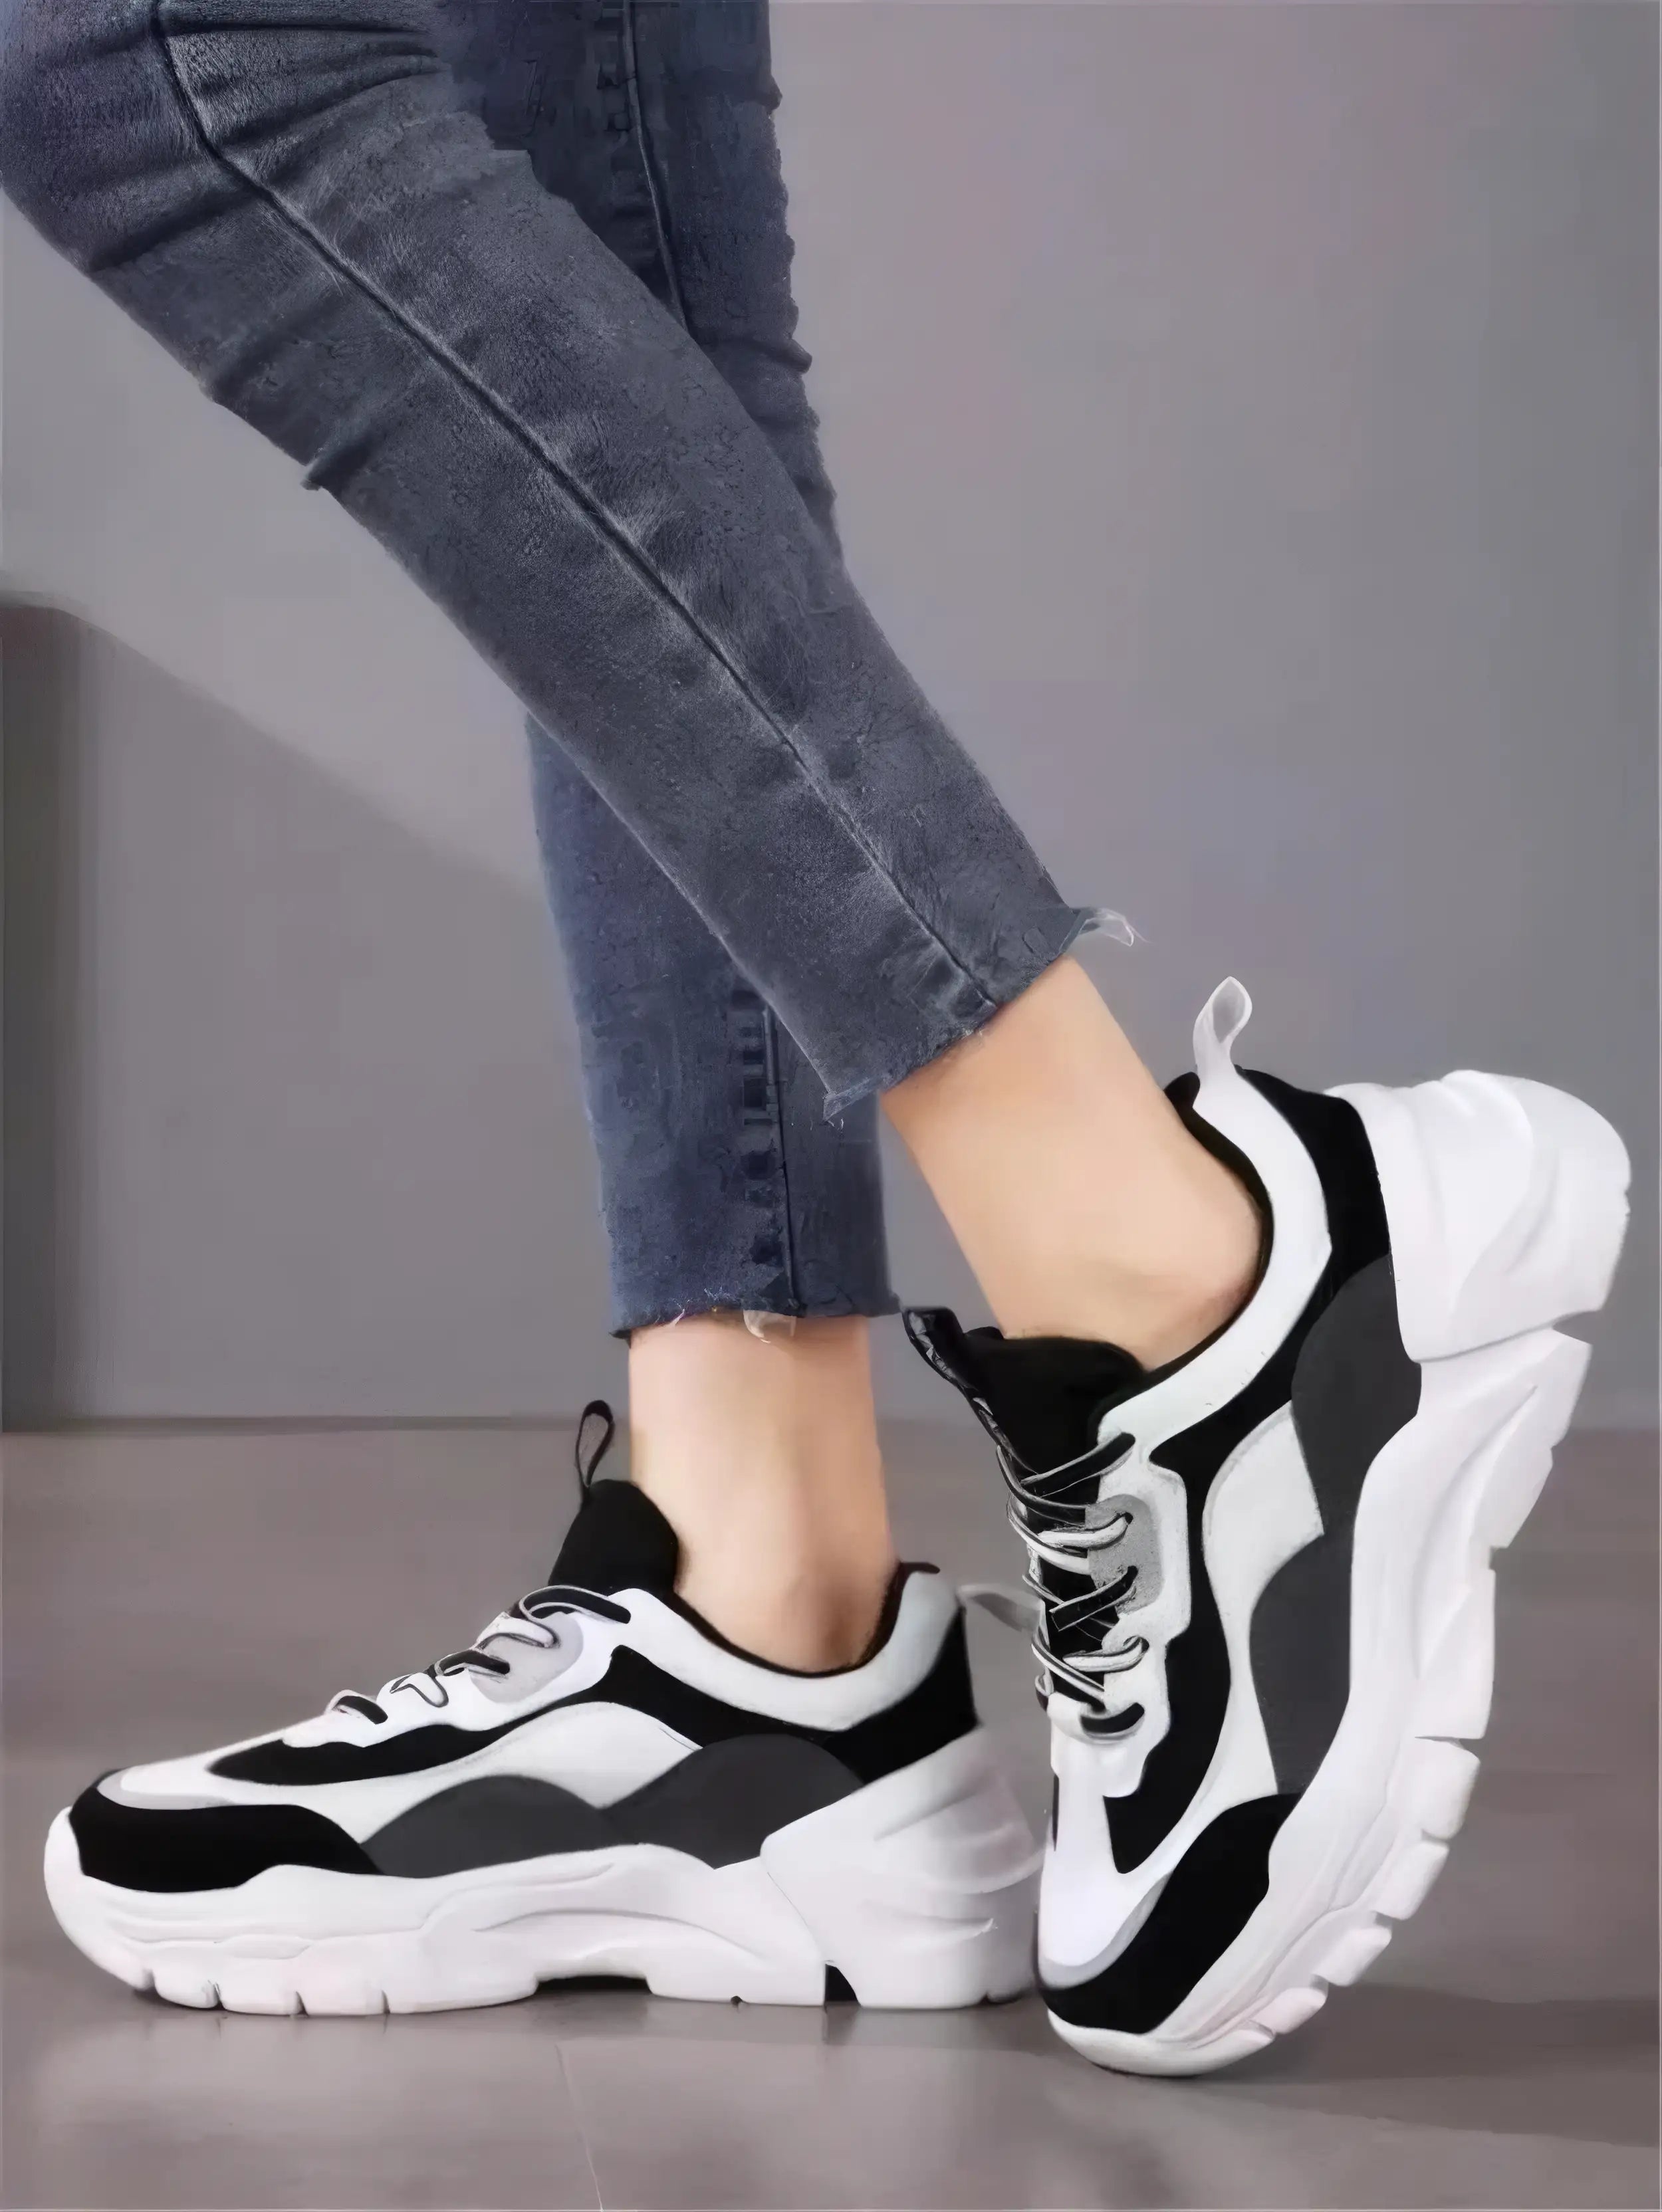 Women's White-Black Synthetic Leather Sneakers Shoes